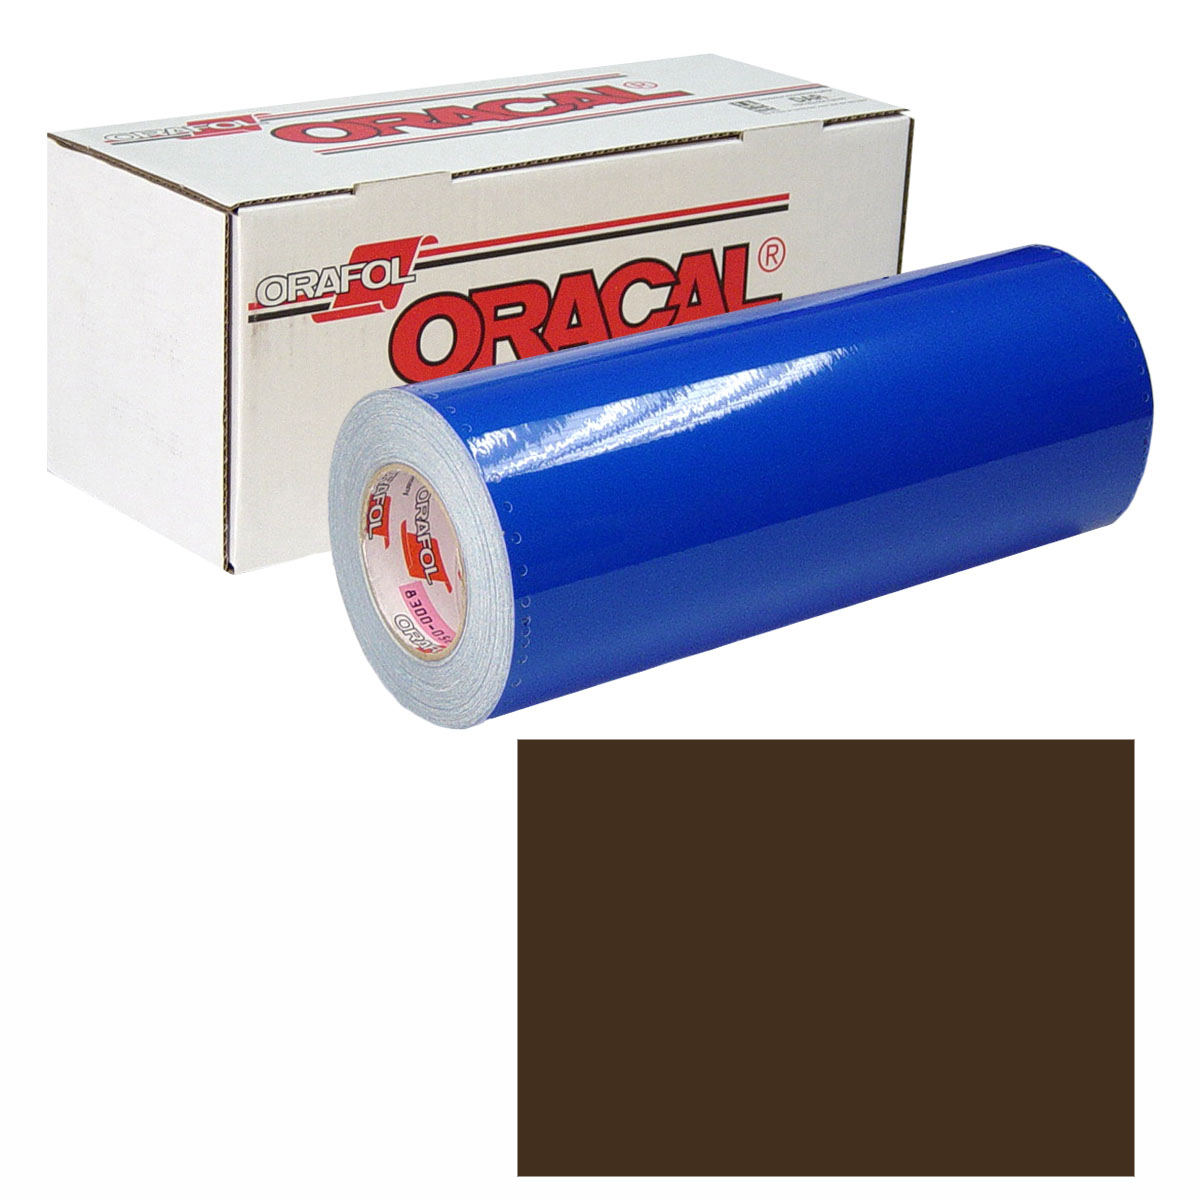 ORACAL 631 30in X 50yd 080 Brown